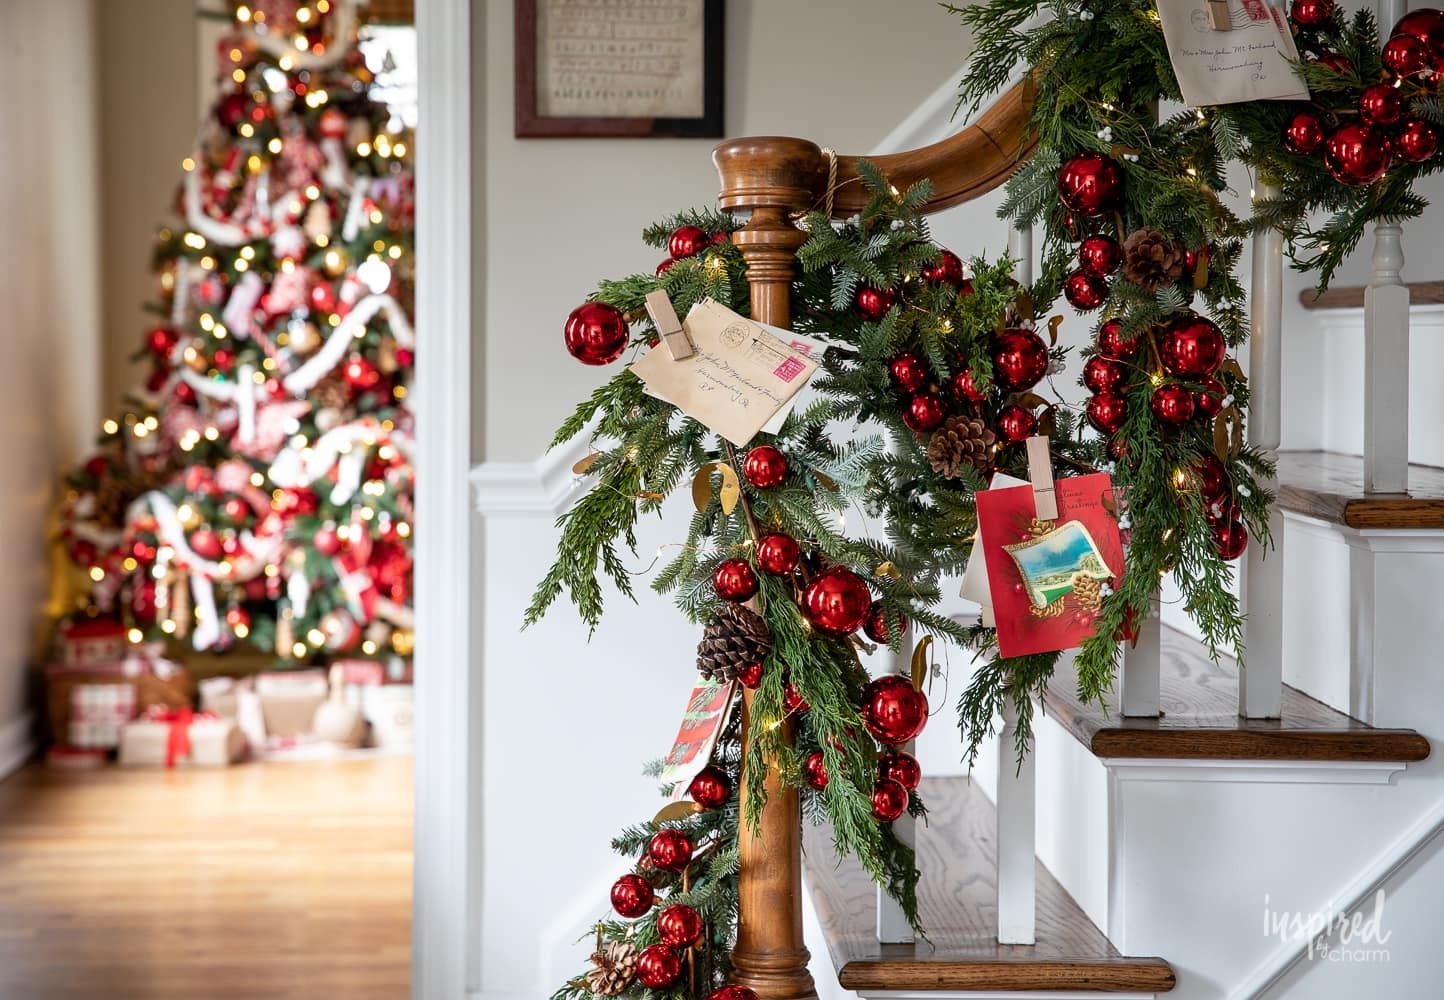 45 DIY Christmas Garlands to Drape Your Home in Holiday Cheer | Christmas  door decorations, Christmas garland, Front door christmas decorations